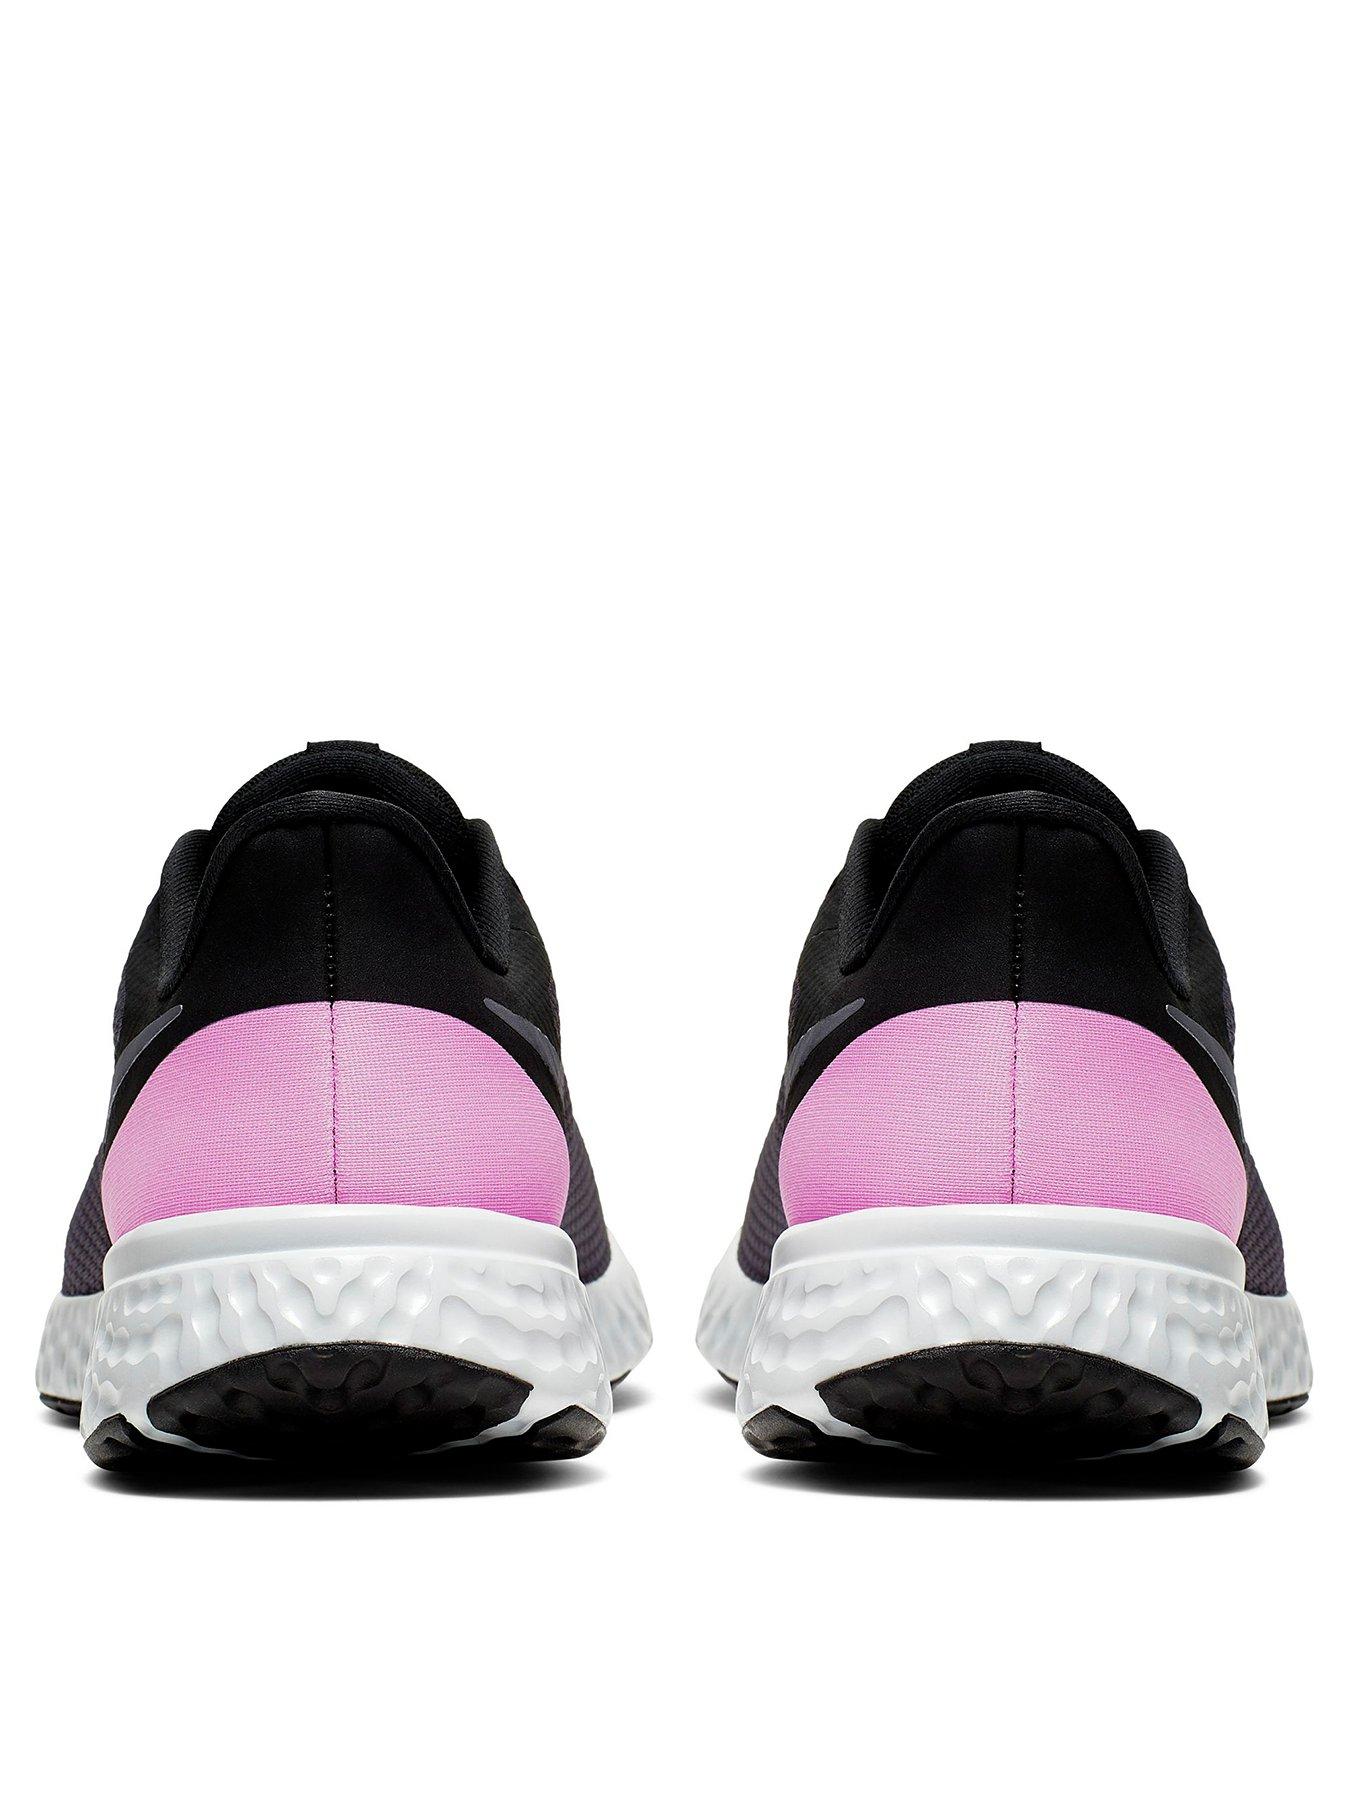 nike black with pink